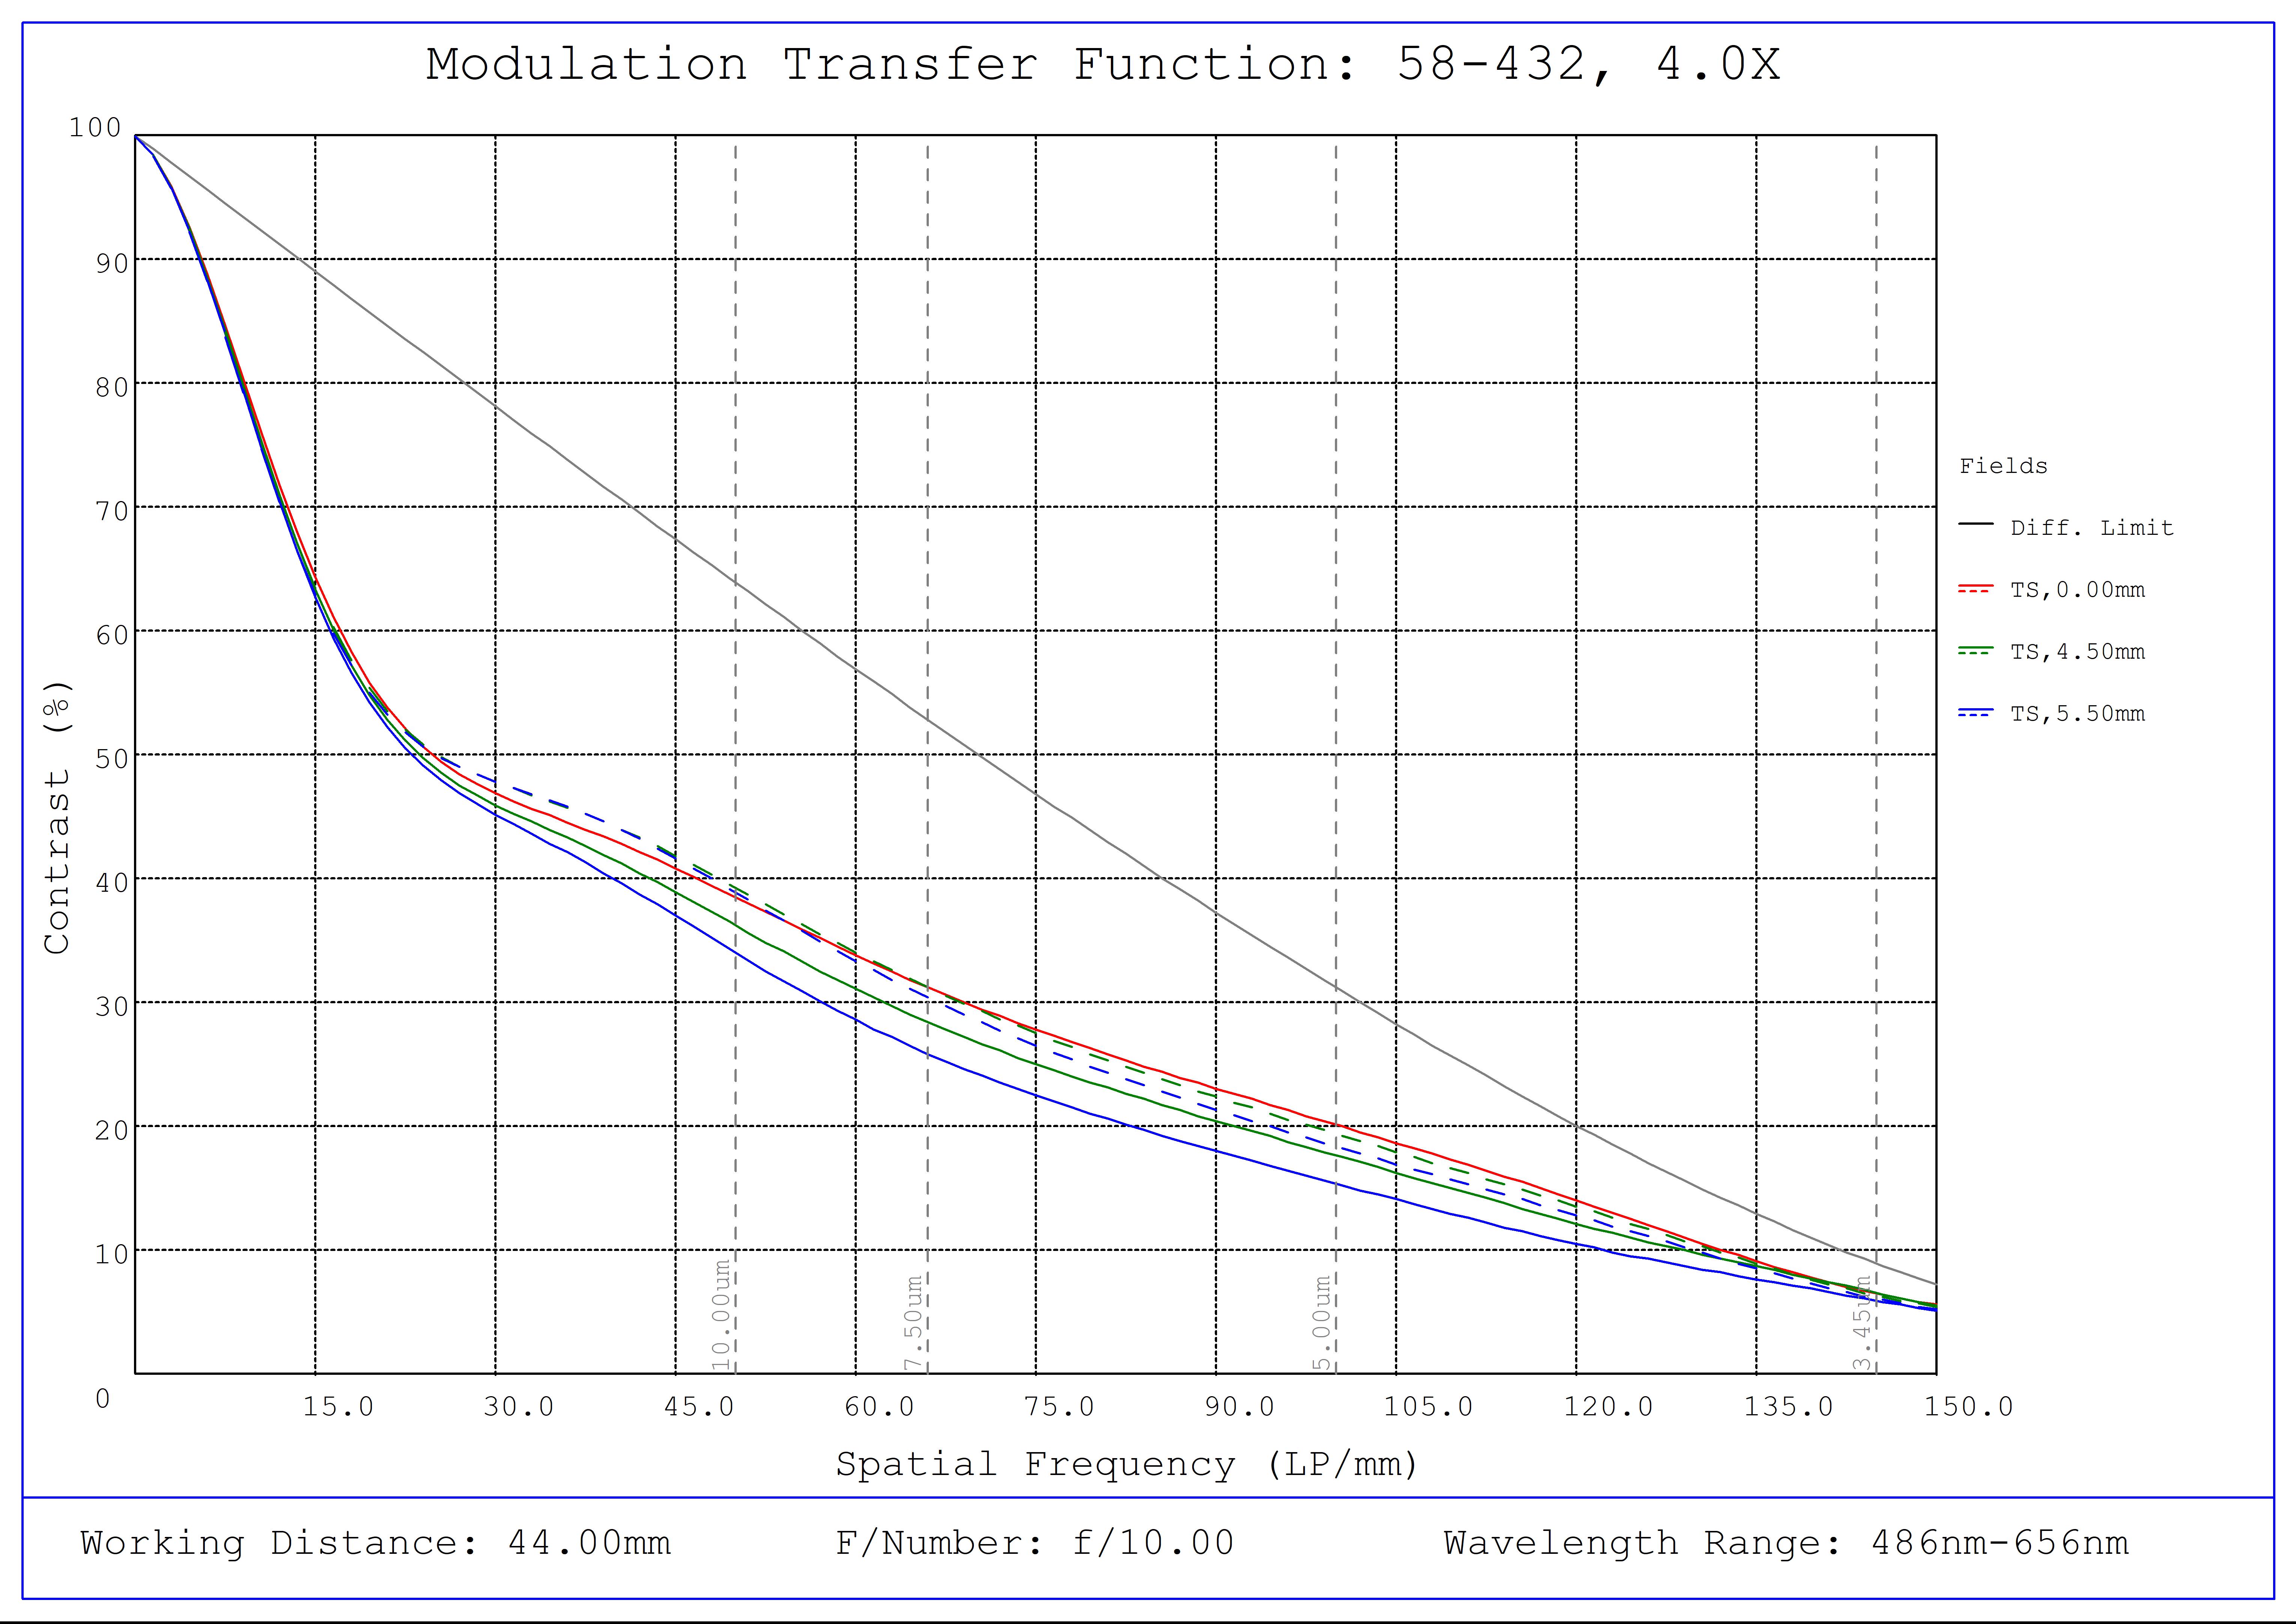 #58-432, 4.0X SilverTL™ Telecentric Lens, Modulated Transfer Function (MTF) Plot, 44mm Working Distance, f10